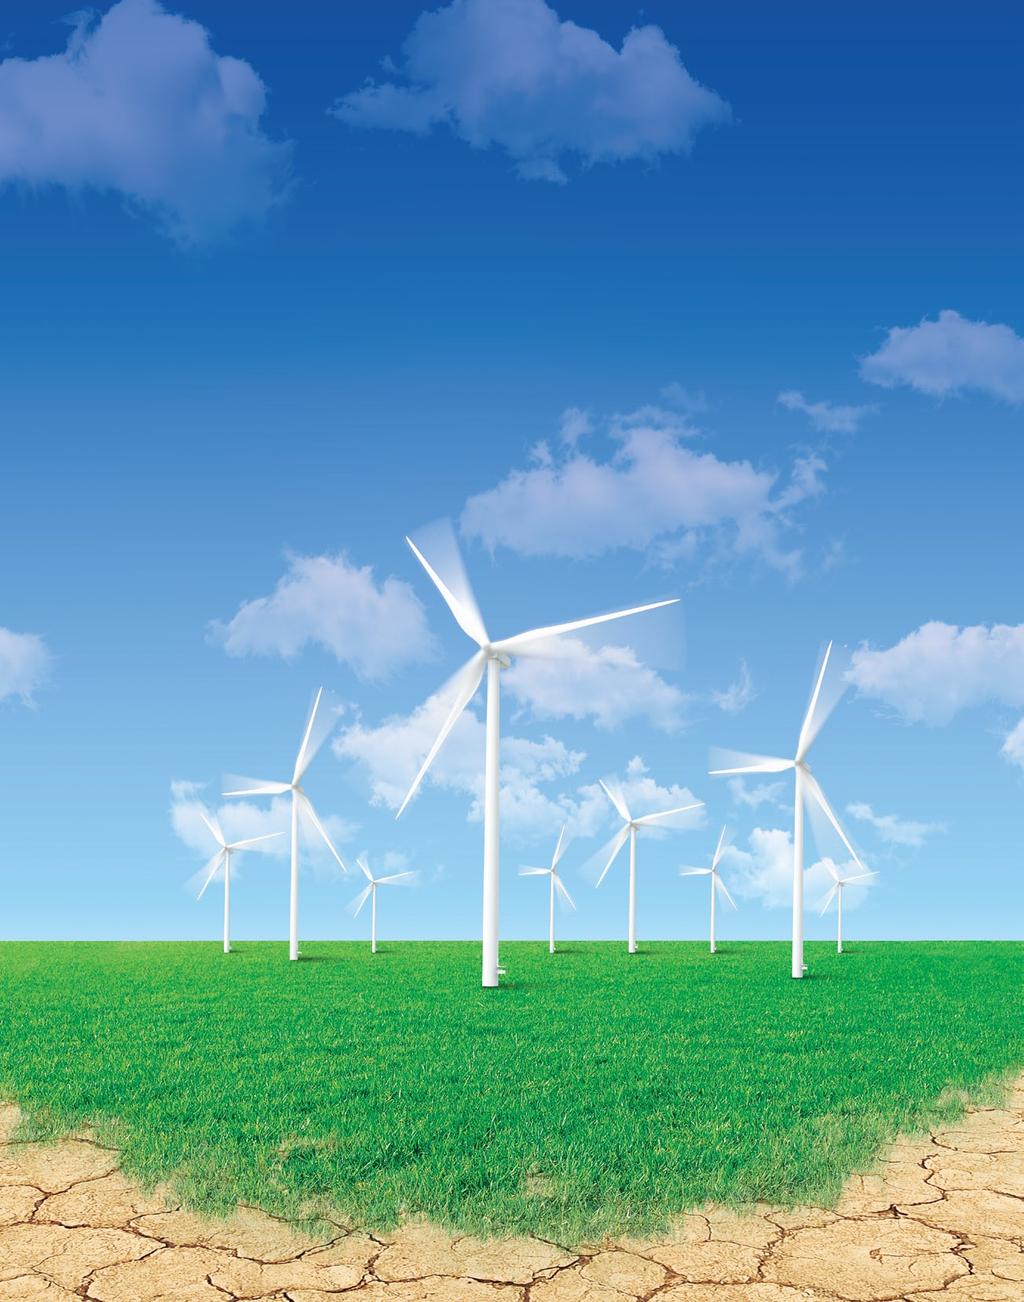 efficiency of wind power generators consisting of top quality components.